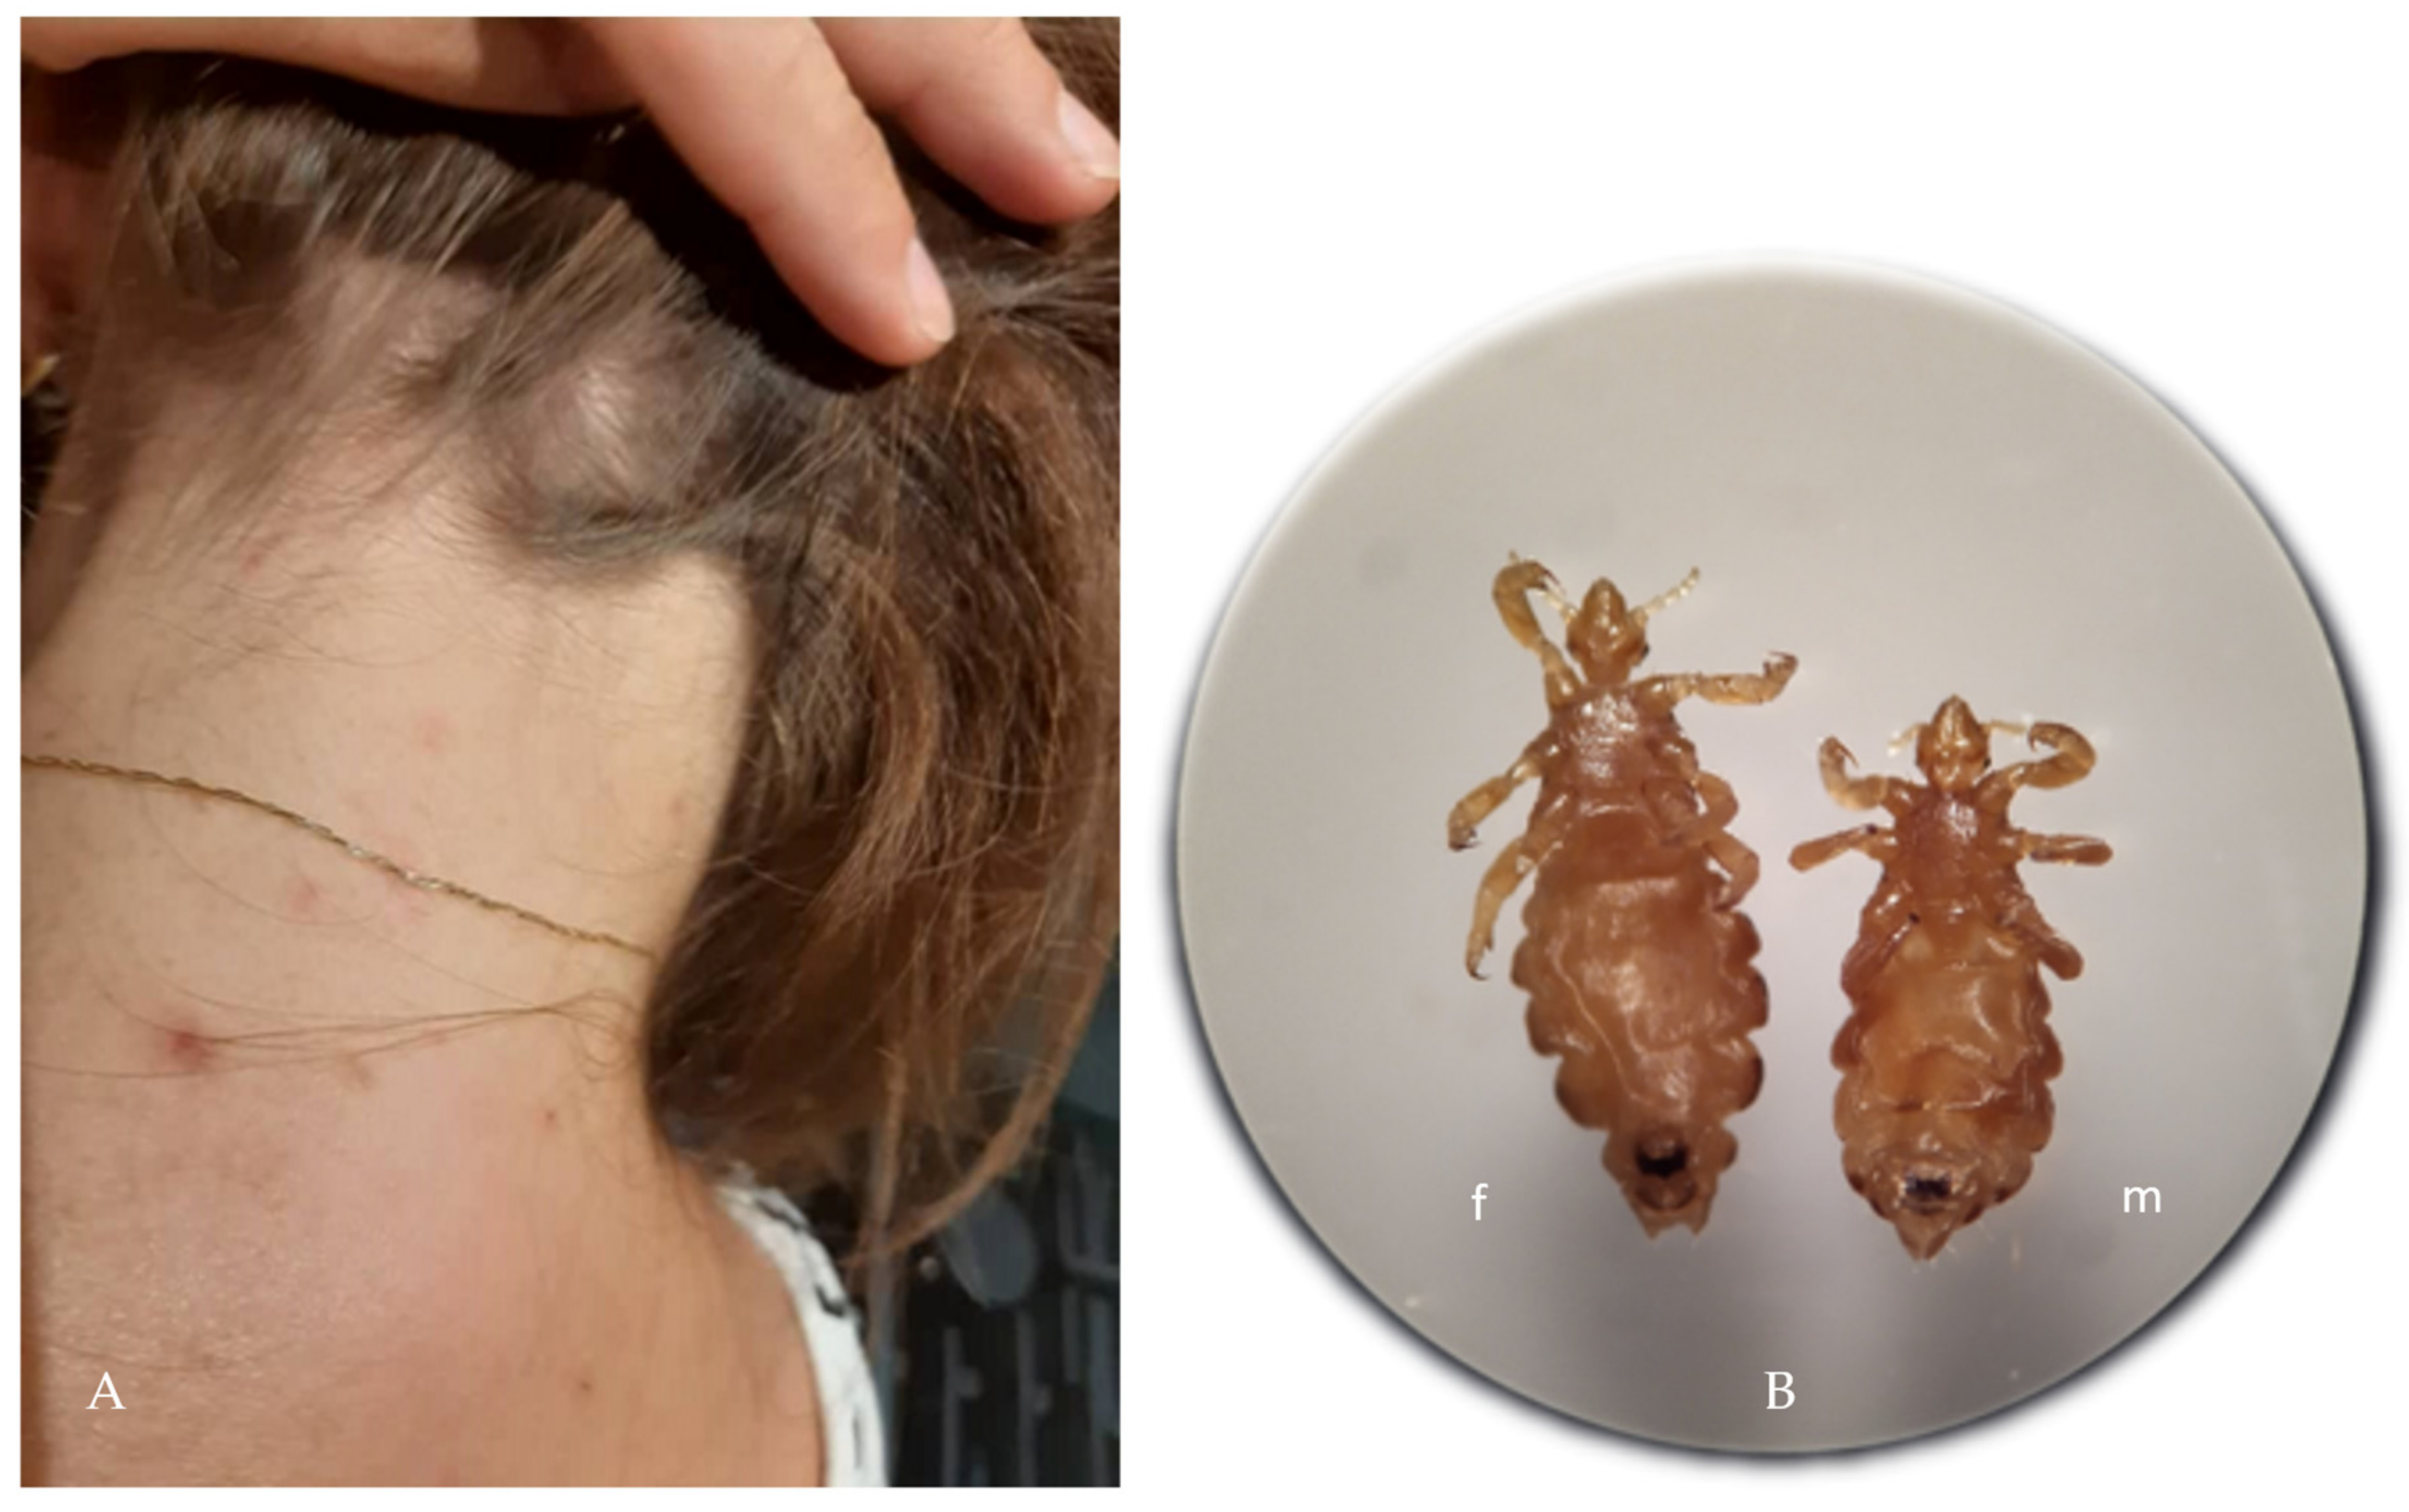 What Is lice and How Does It Work?